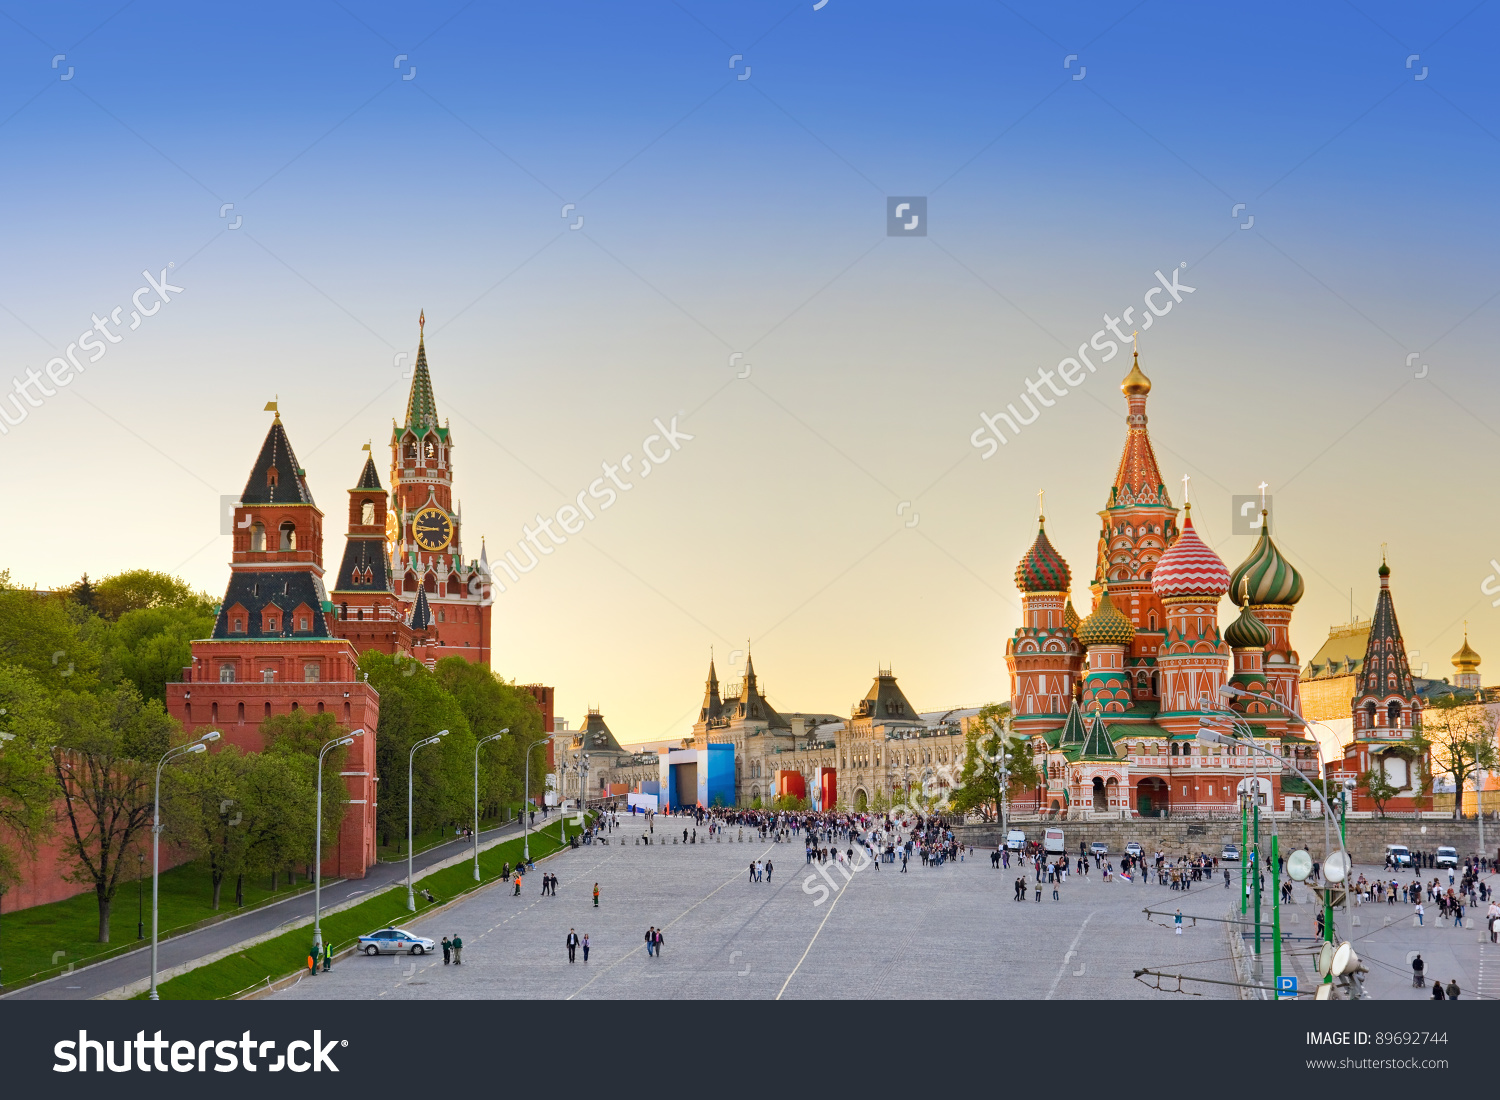 High Resolution Wallpaper | Red Square 1500x1100 px